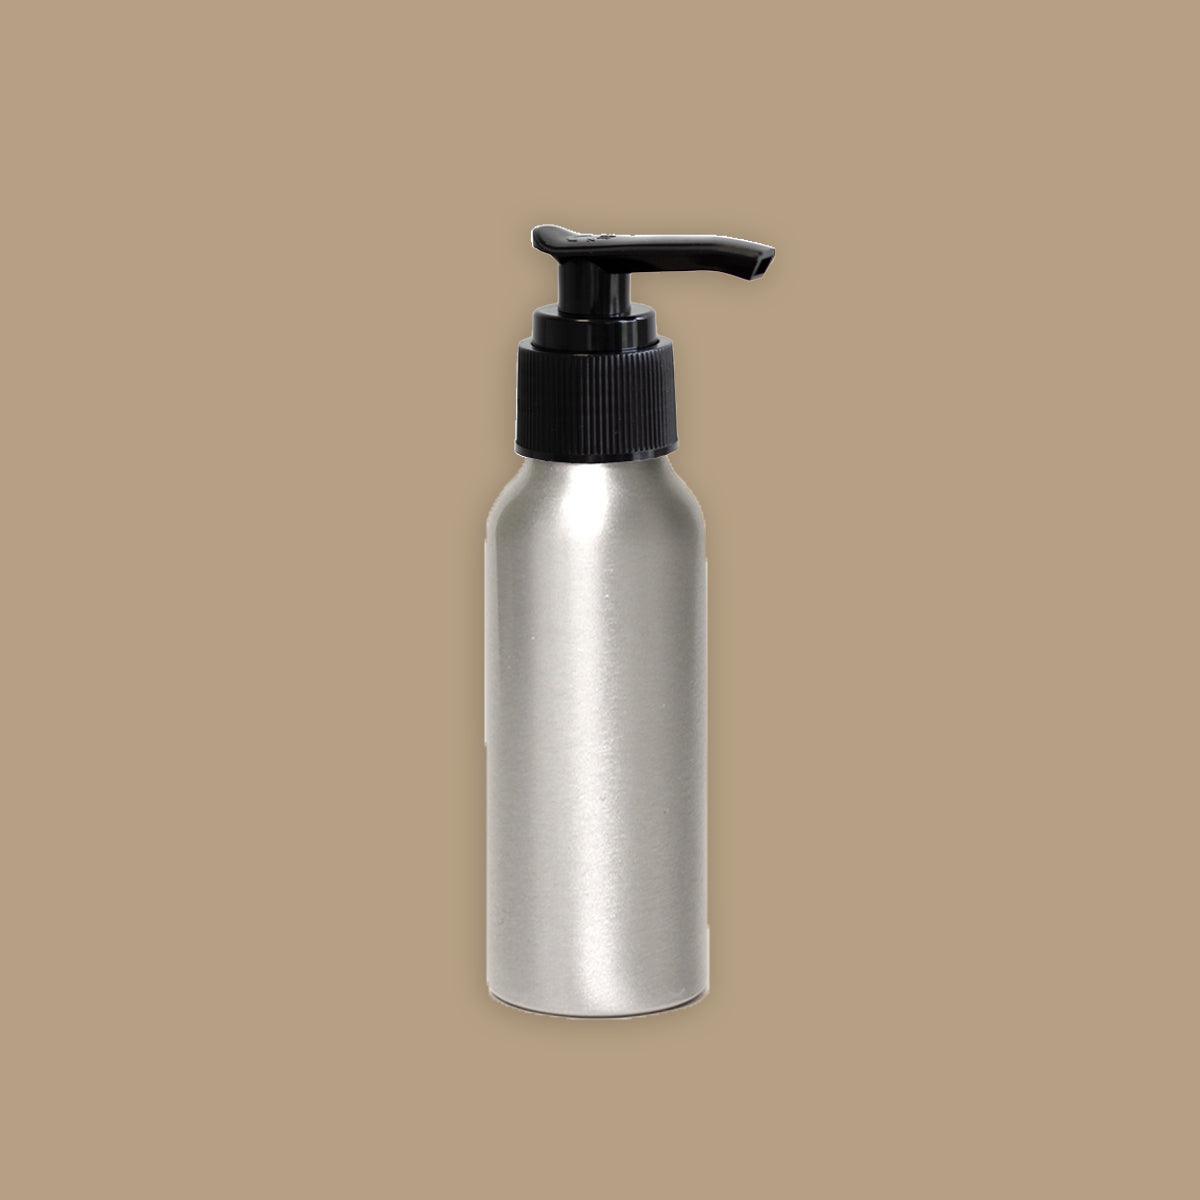 100ml aluminum bottle with lotion pump - local - letsbelocal.ca